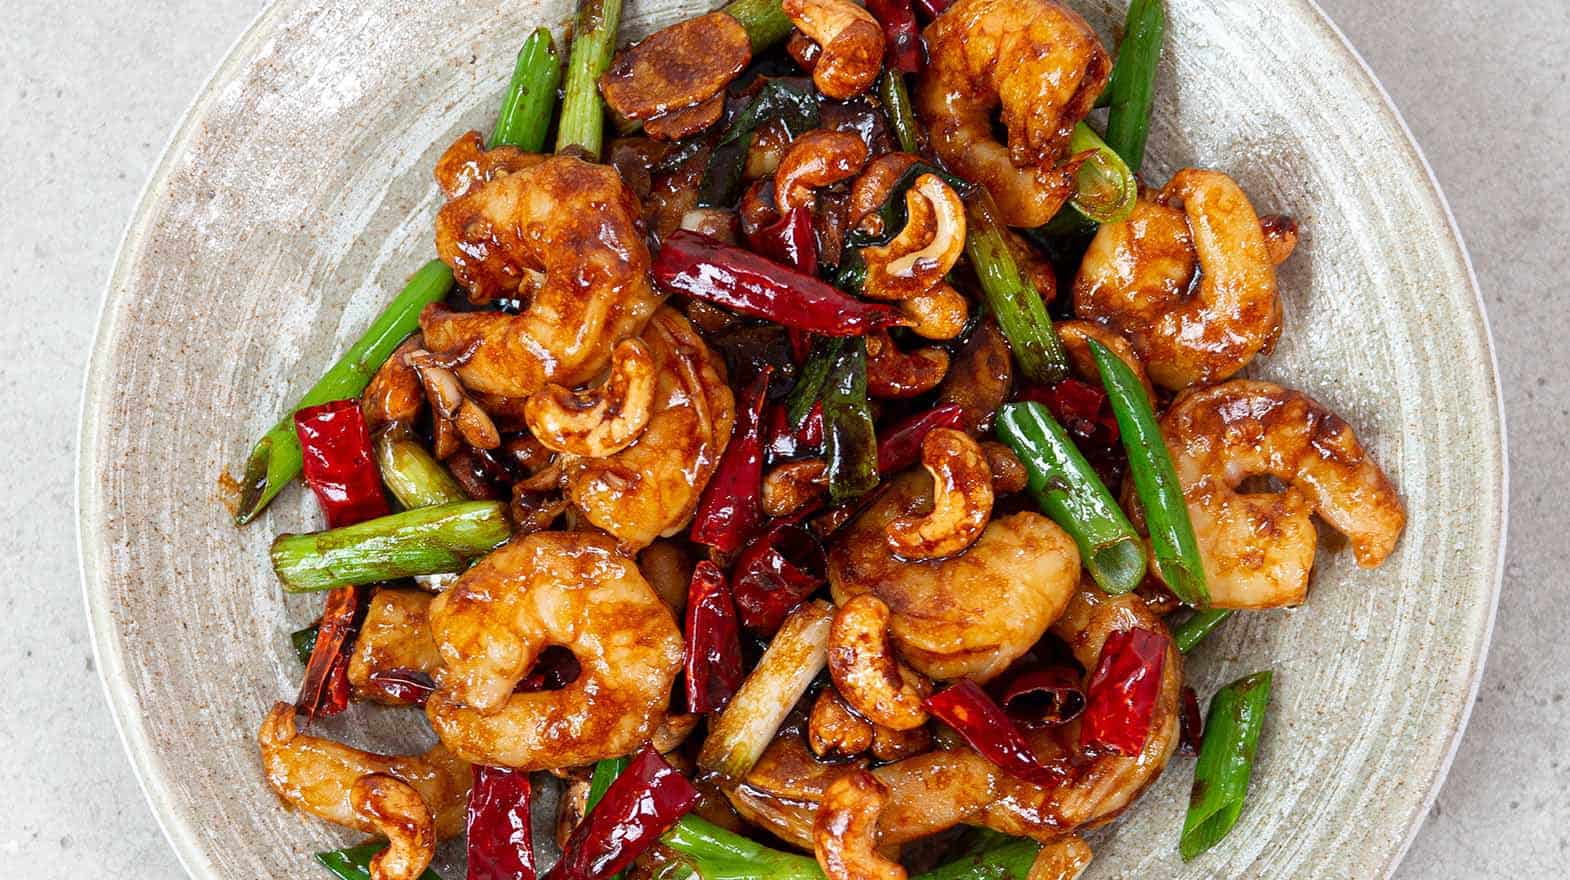 King Prawns and Cashews in a Sweet and Sour Sauce